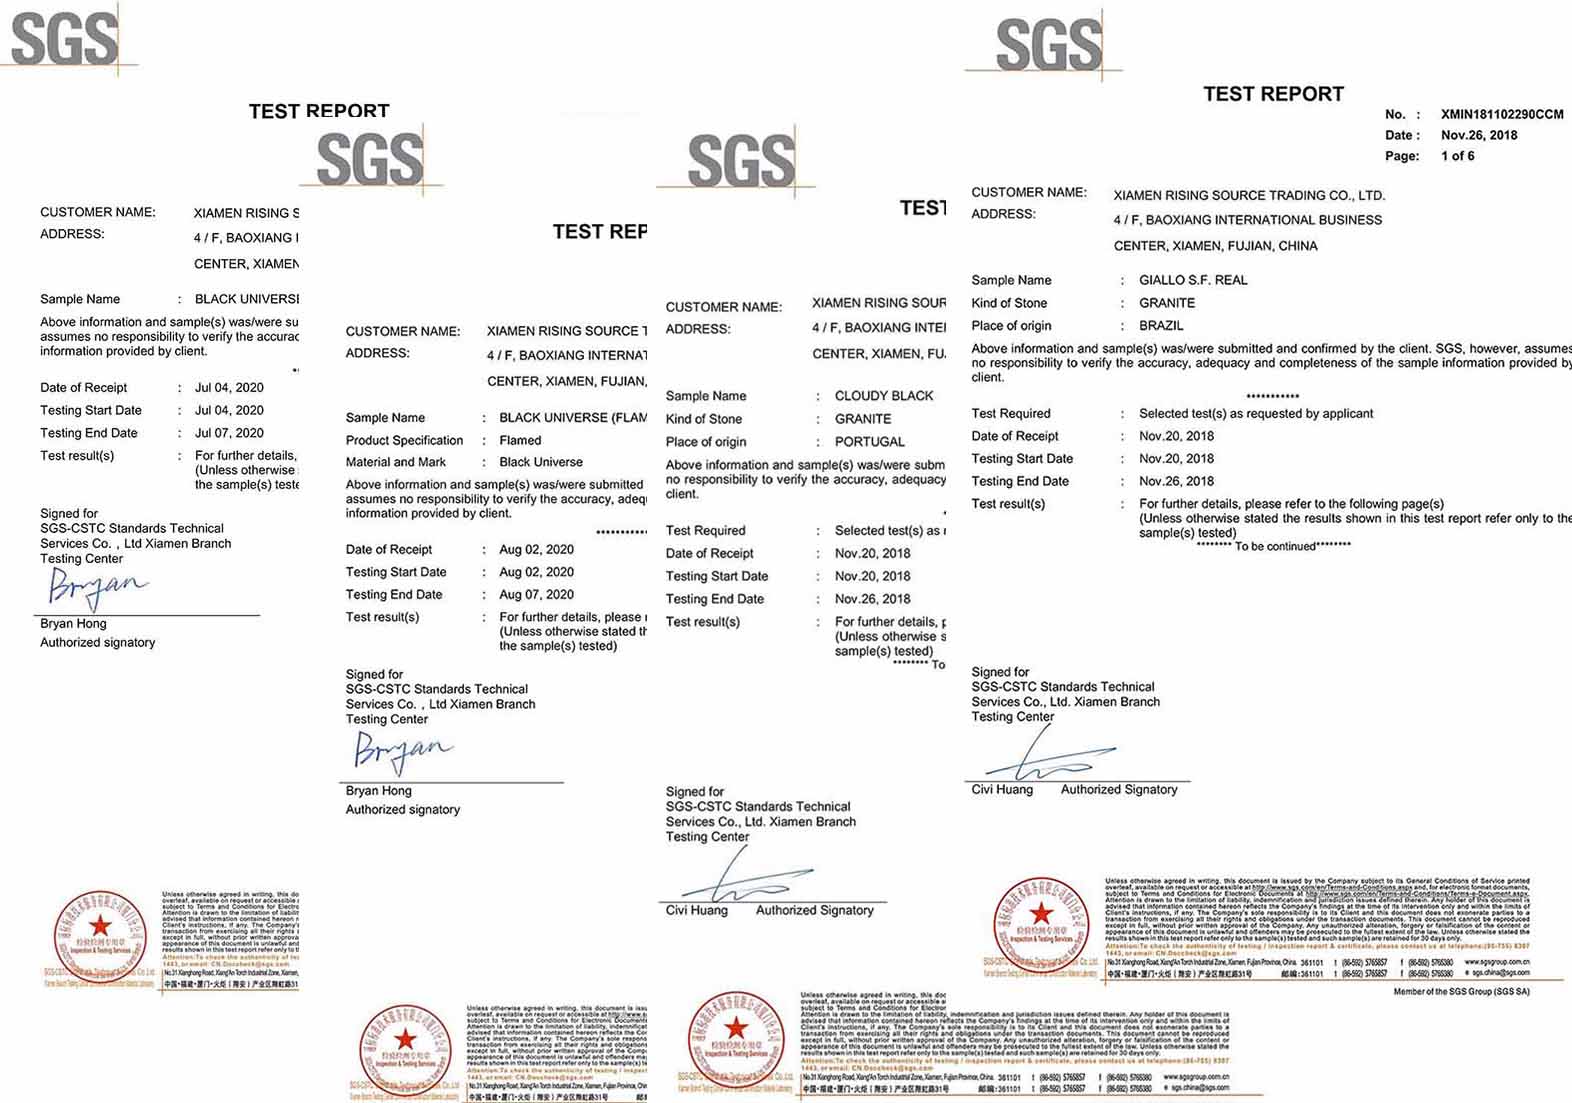 Rising source SGS test report 4